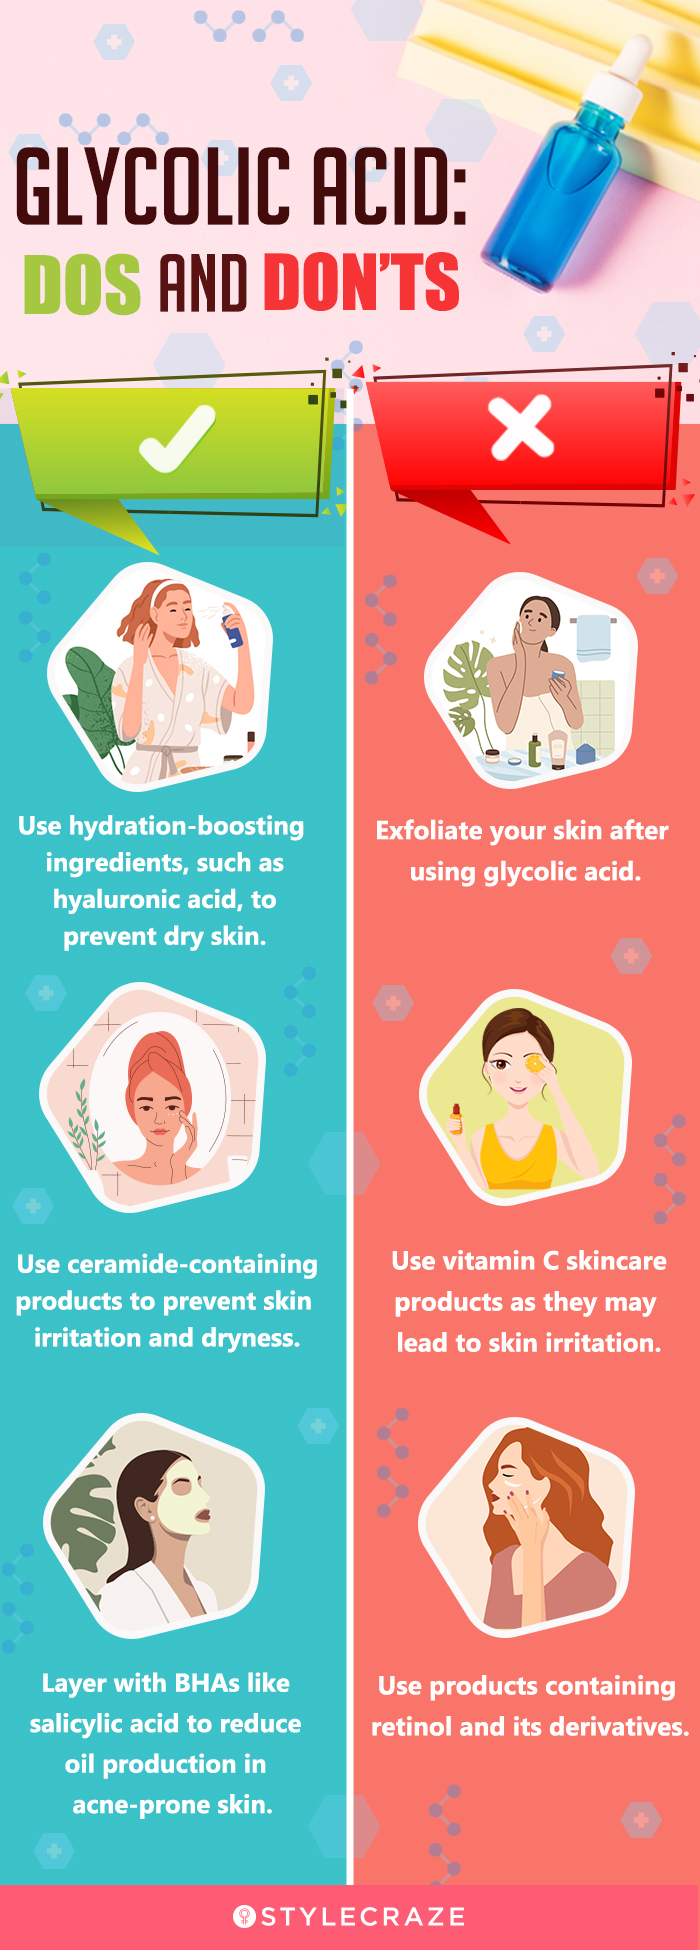 Fern ironi screech What Is Glycolic Acid And How To Use It For Skin Care?